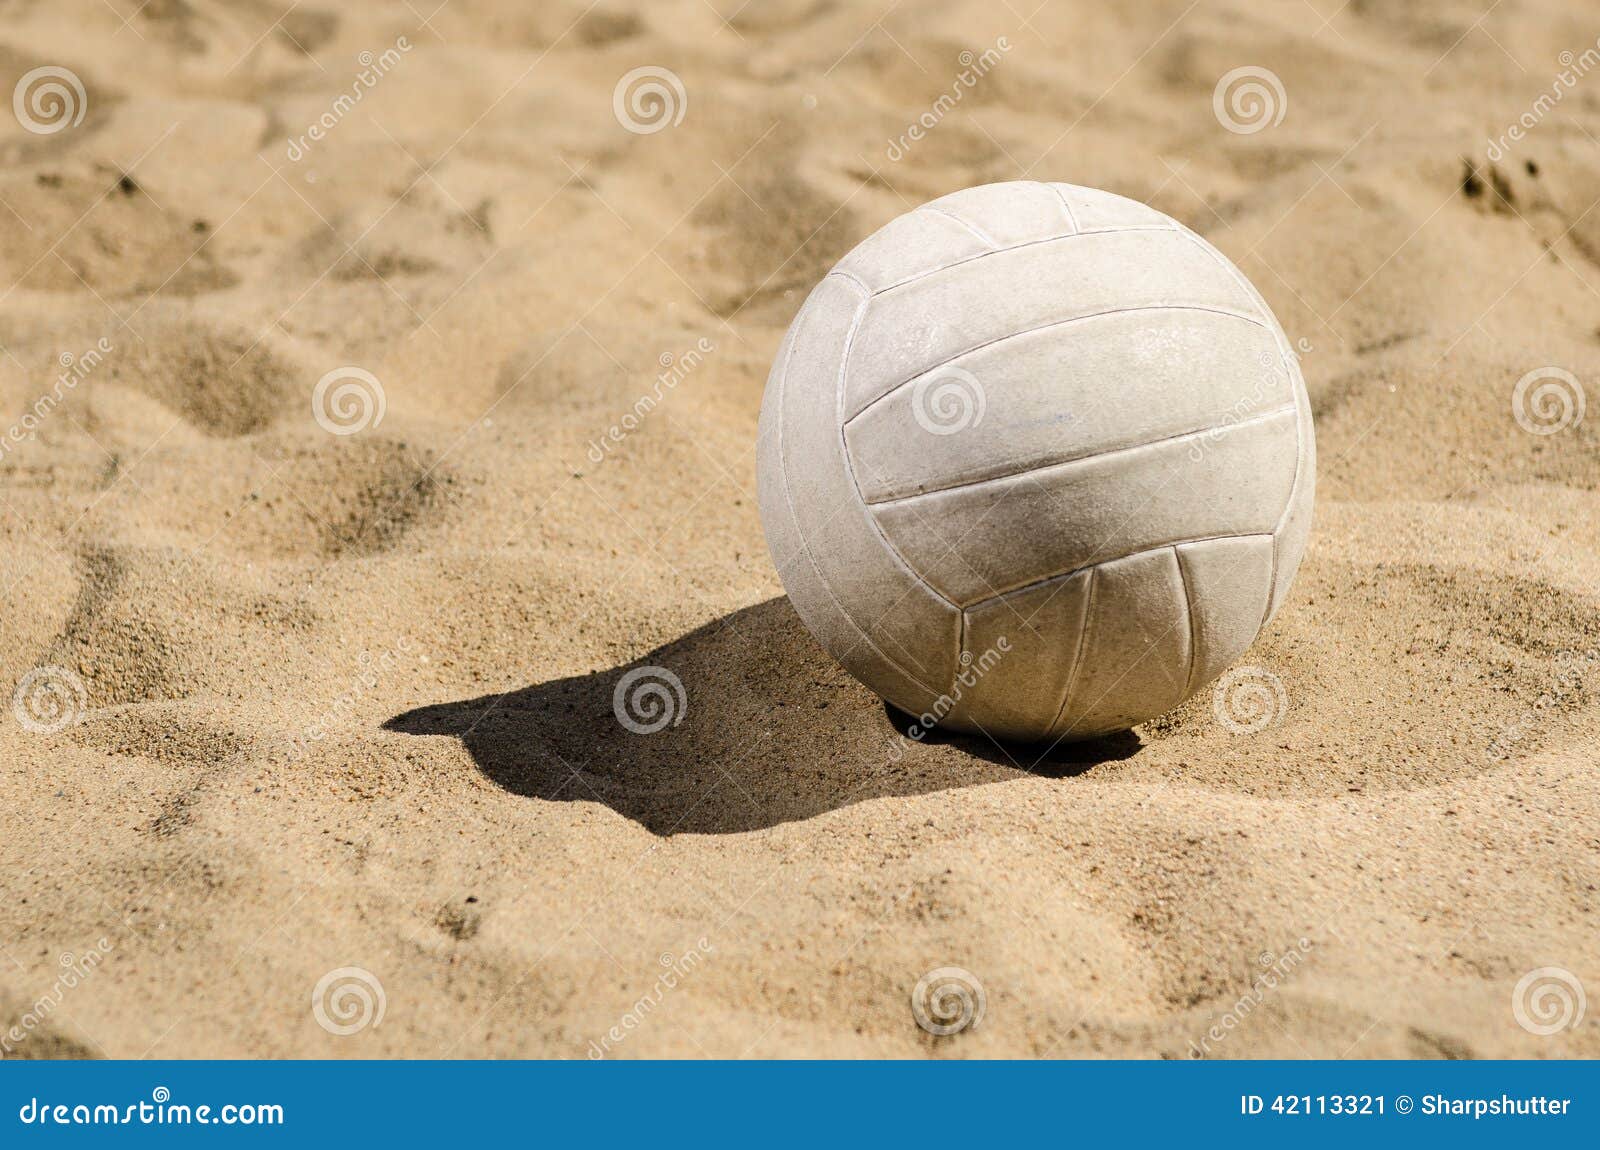 11,077 Volleyball Sand Stock Photos - Free & Royalty-Free Stock